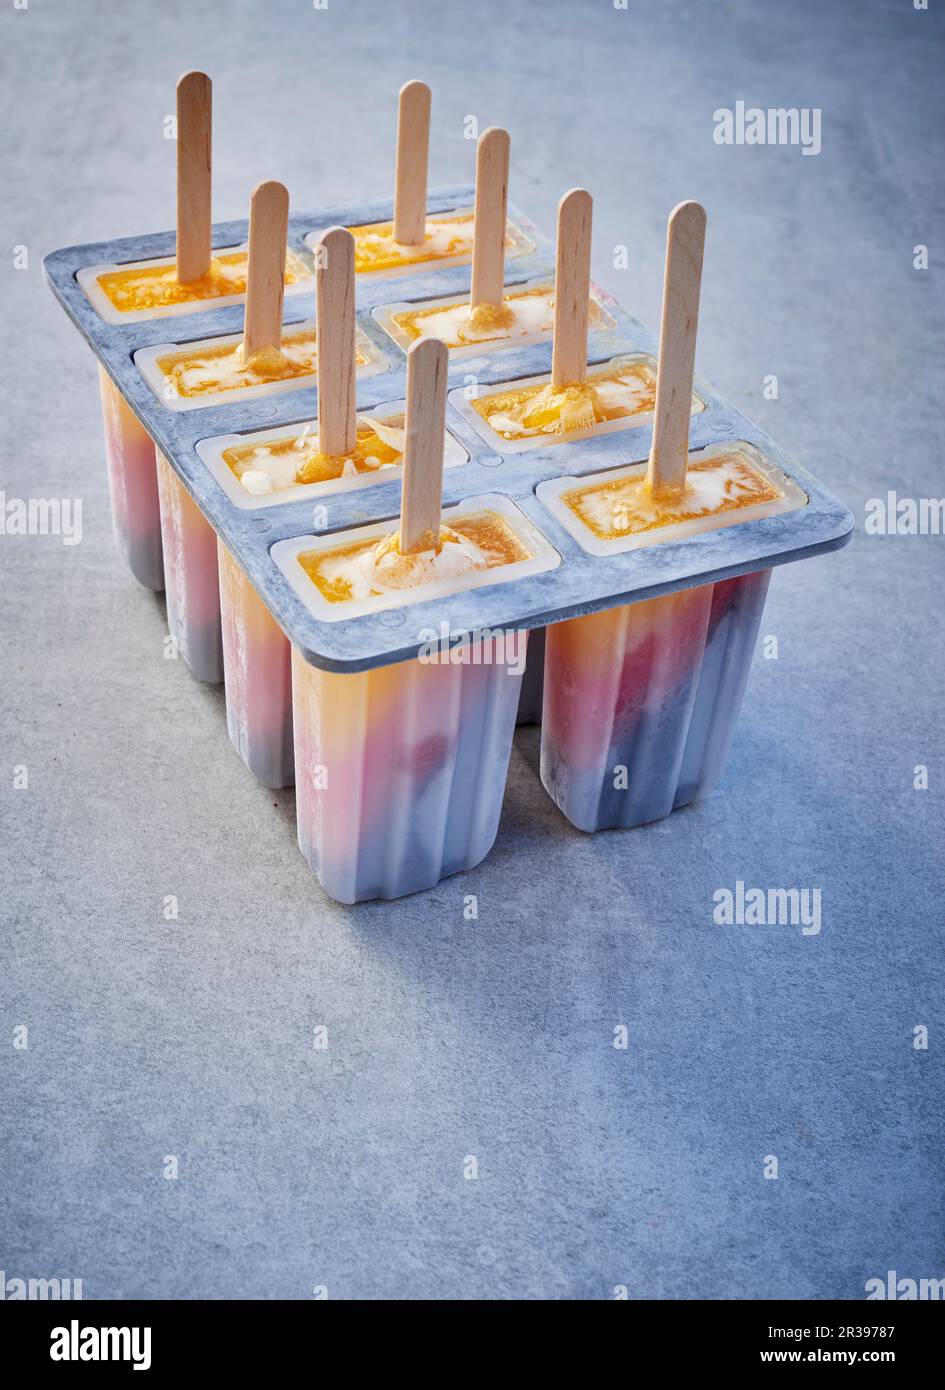 https://c8.alamy.com/comp/2R39787/tri-coloured-ice-cream-sticks-in-lolly-moulds-on-a-grey-surface-2R39787.jpg